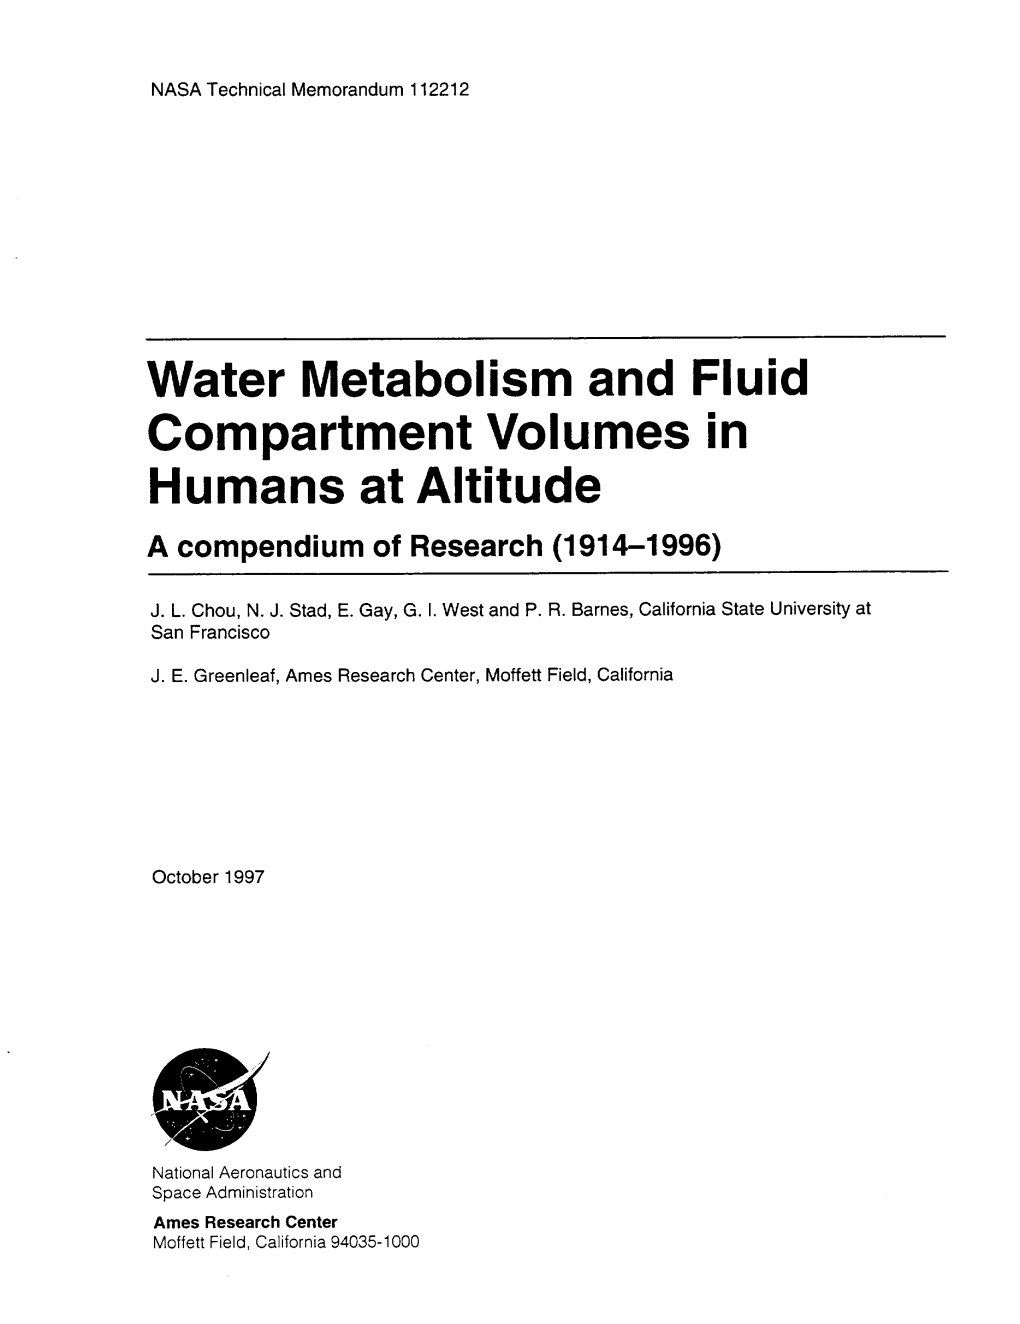 Water Metabolism and Fluid Compartment Volumes in Humans at Altitude